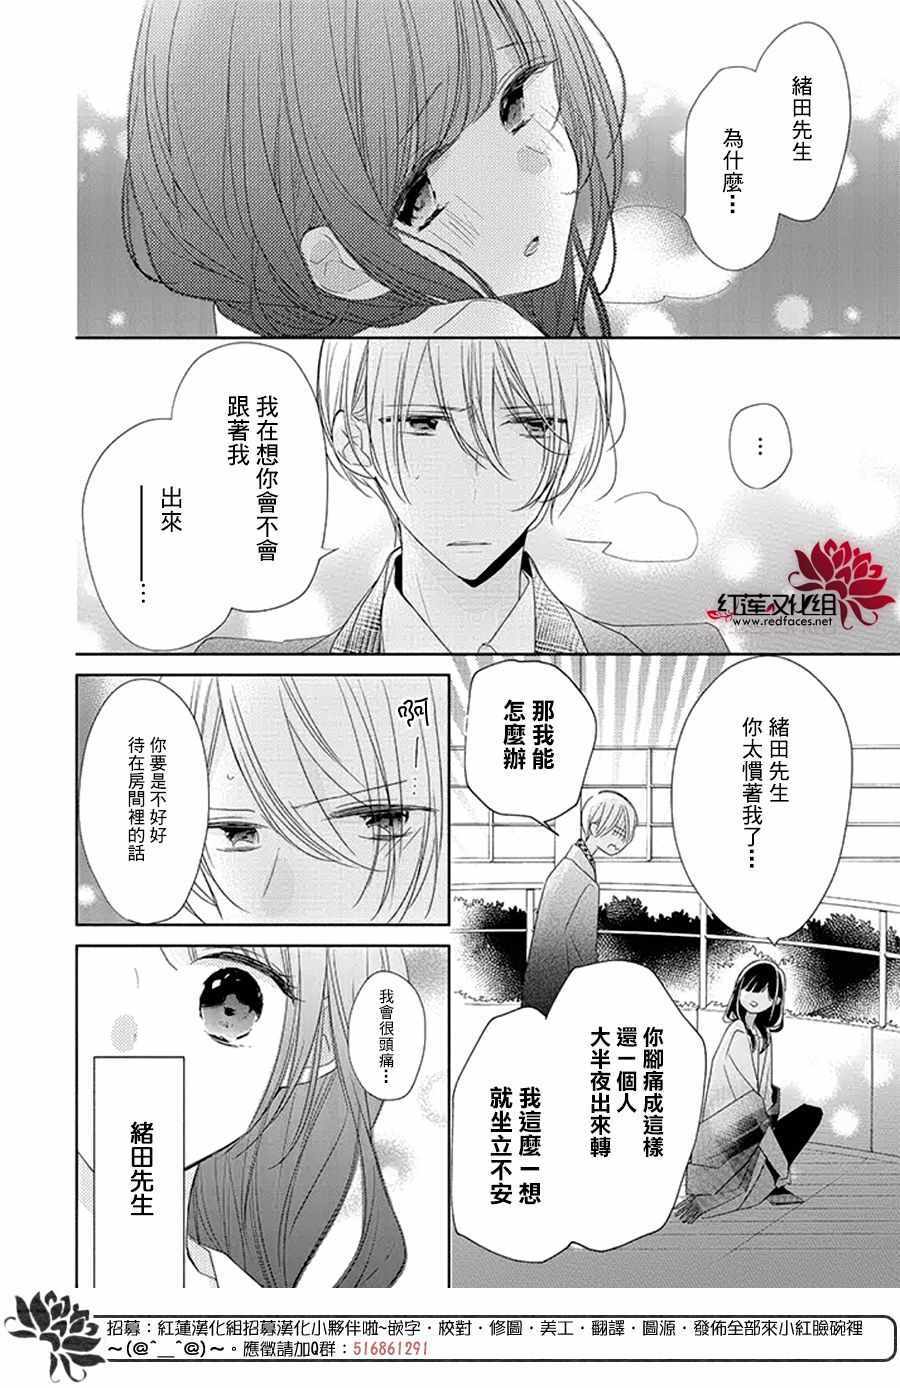 If given a second chance - 20話 - 4